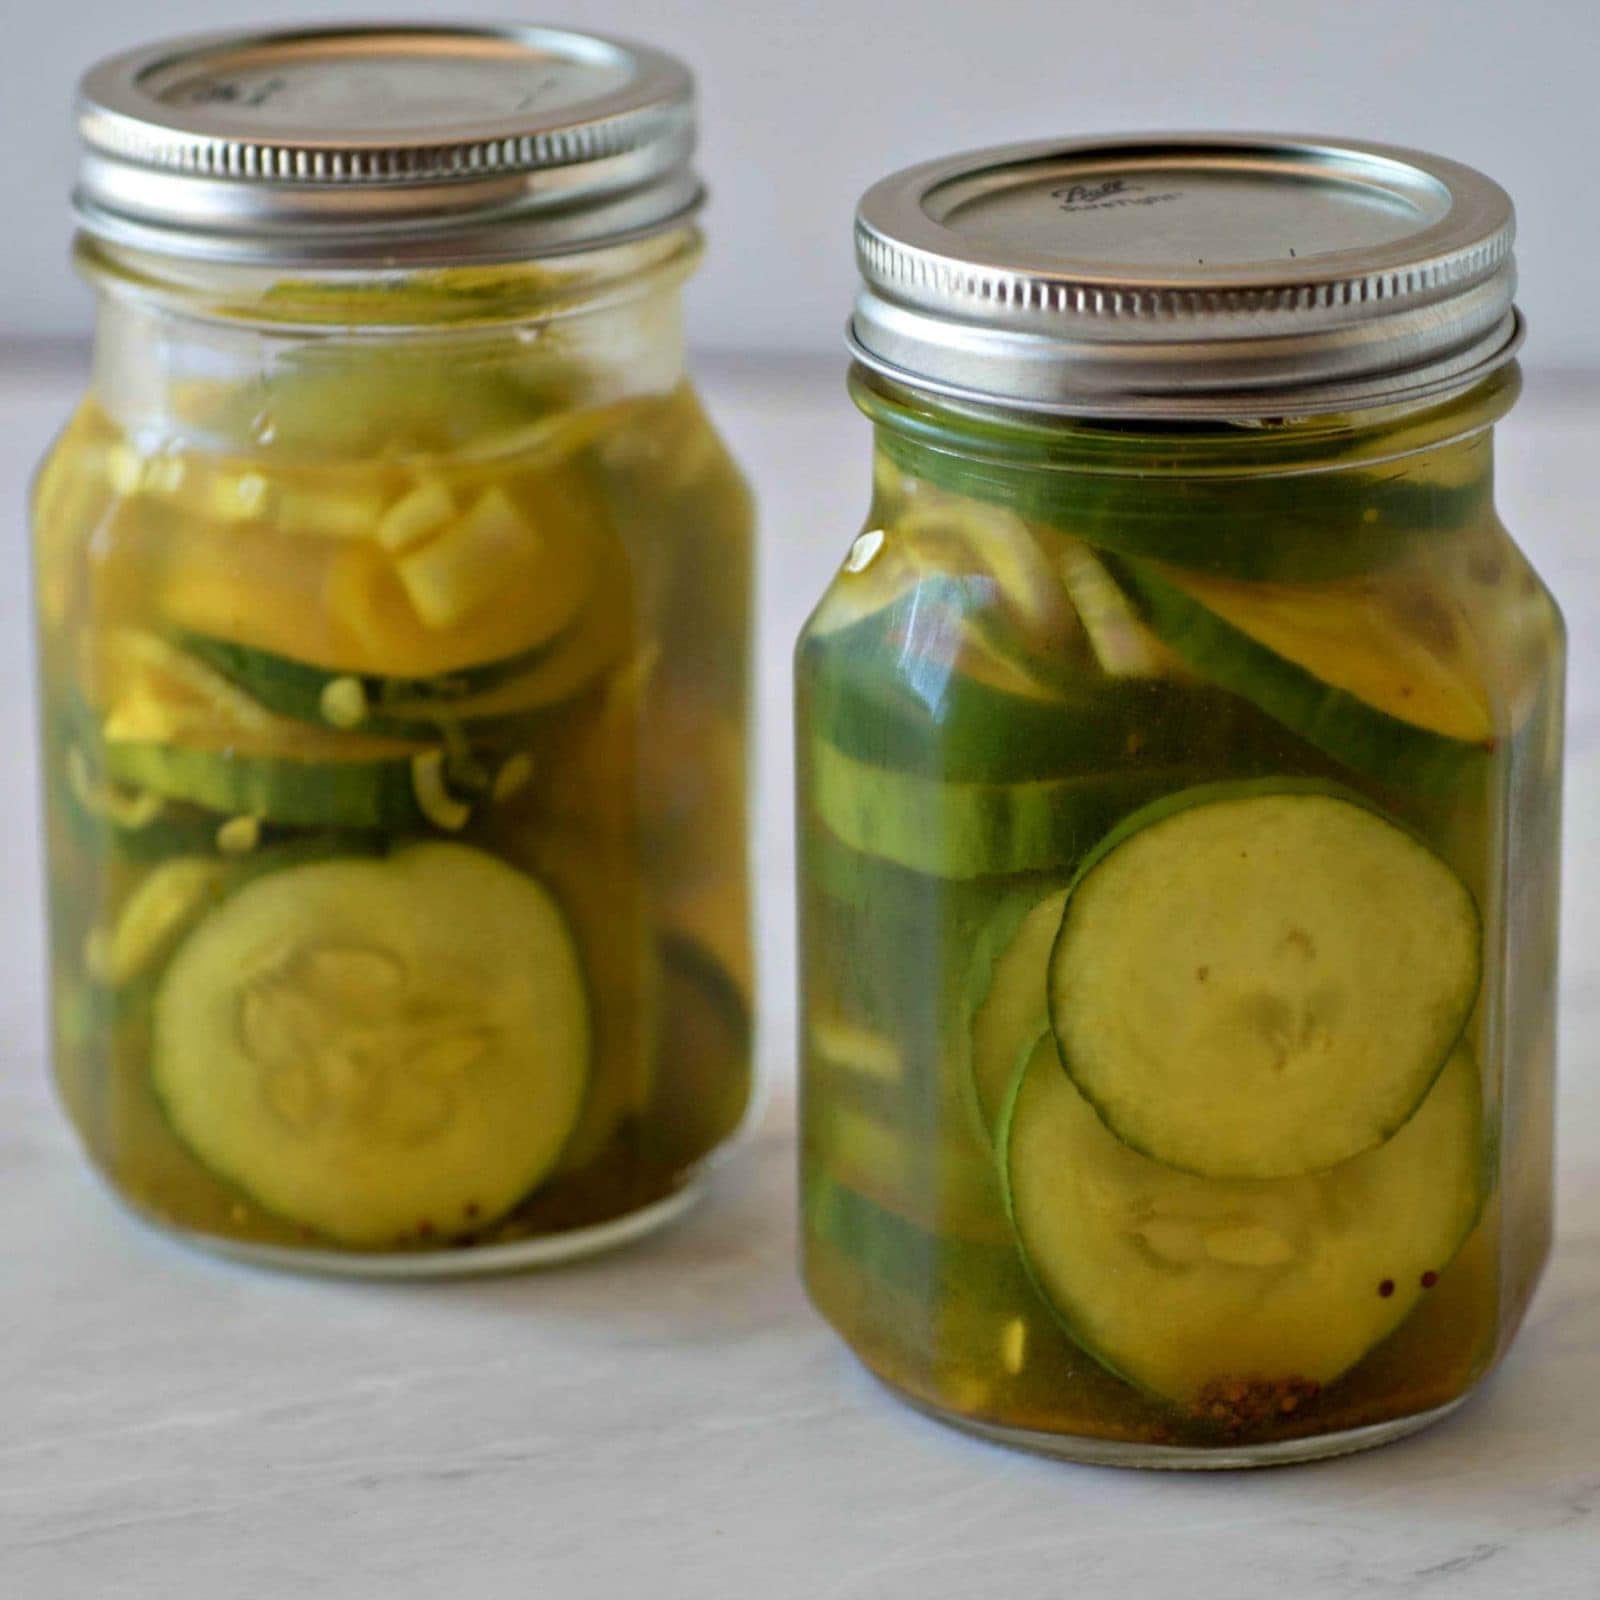 Two jars of homemade refrigerator bread and butter pickles